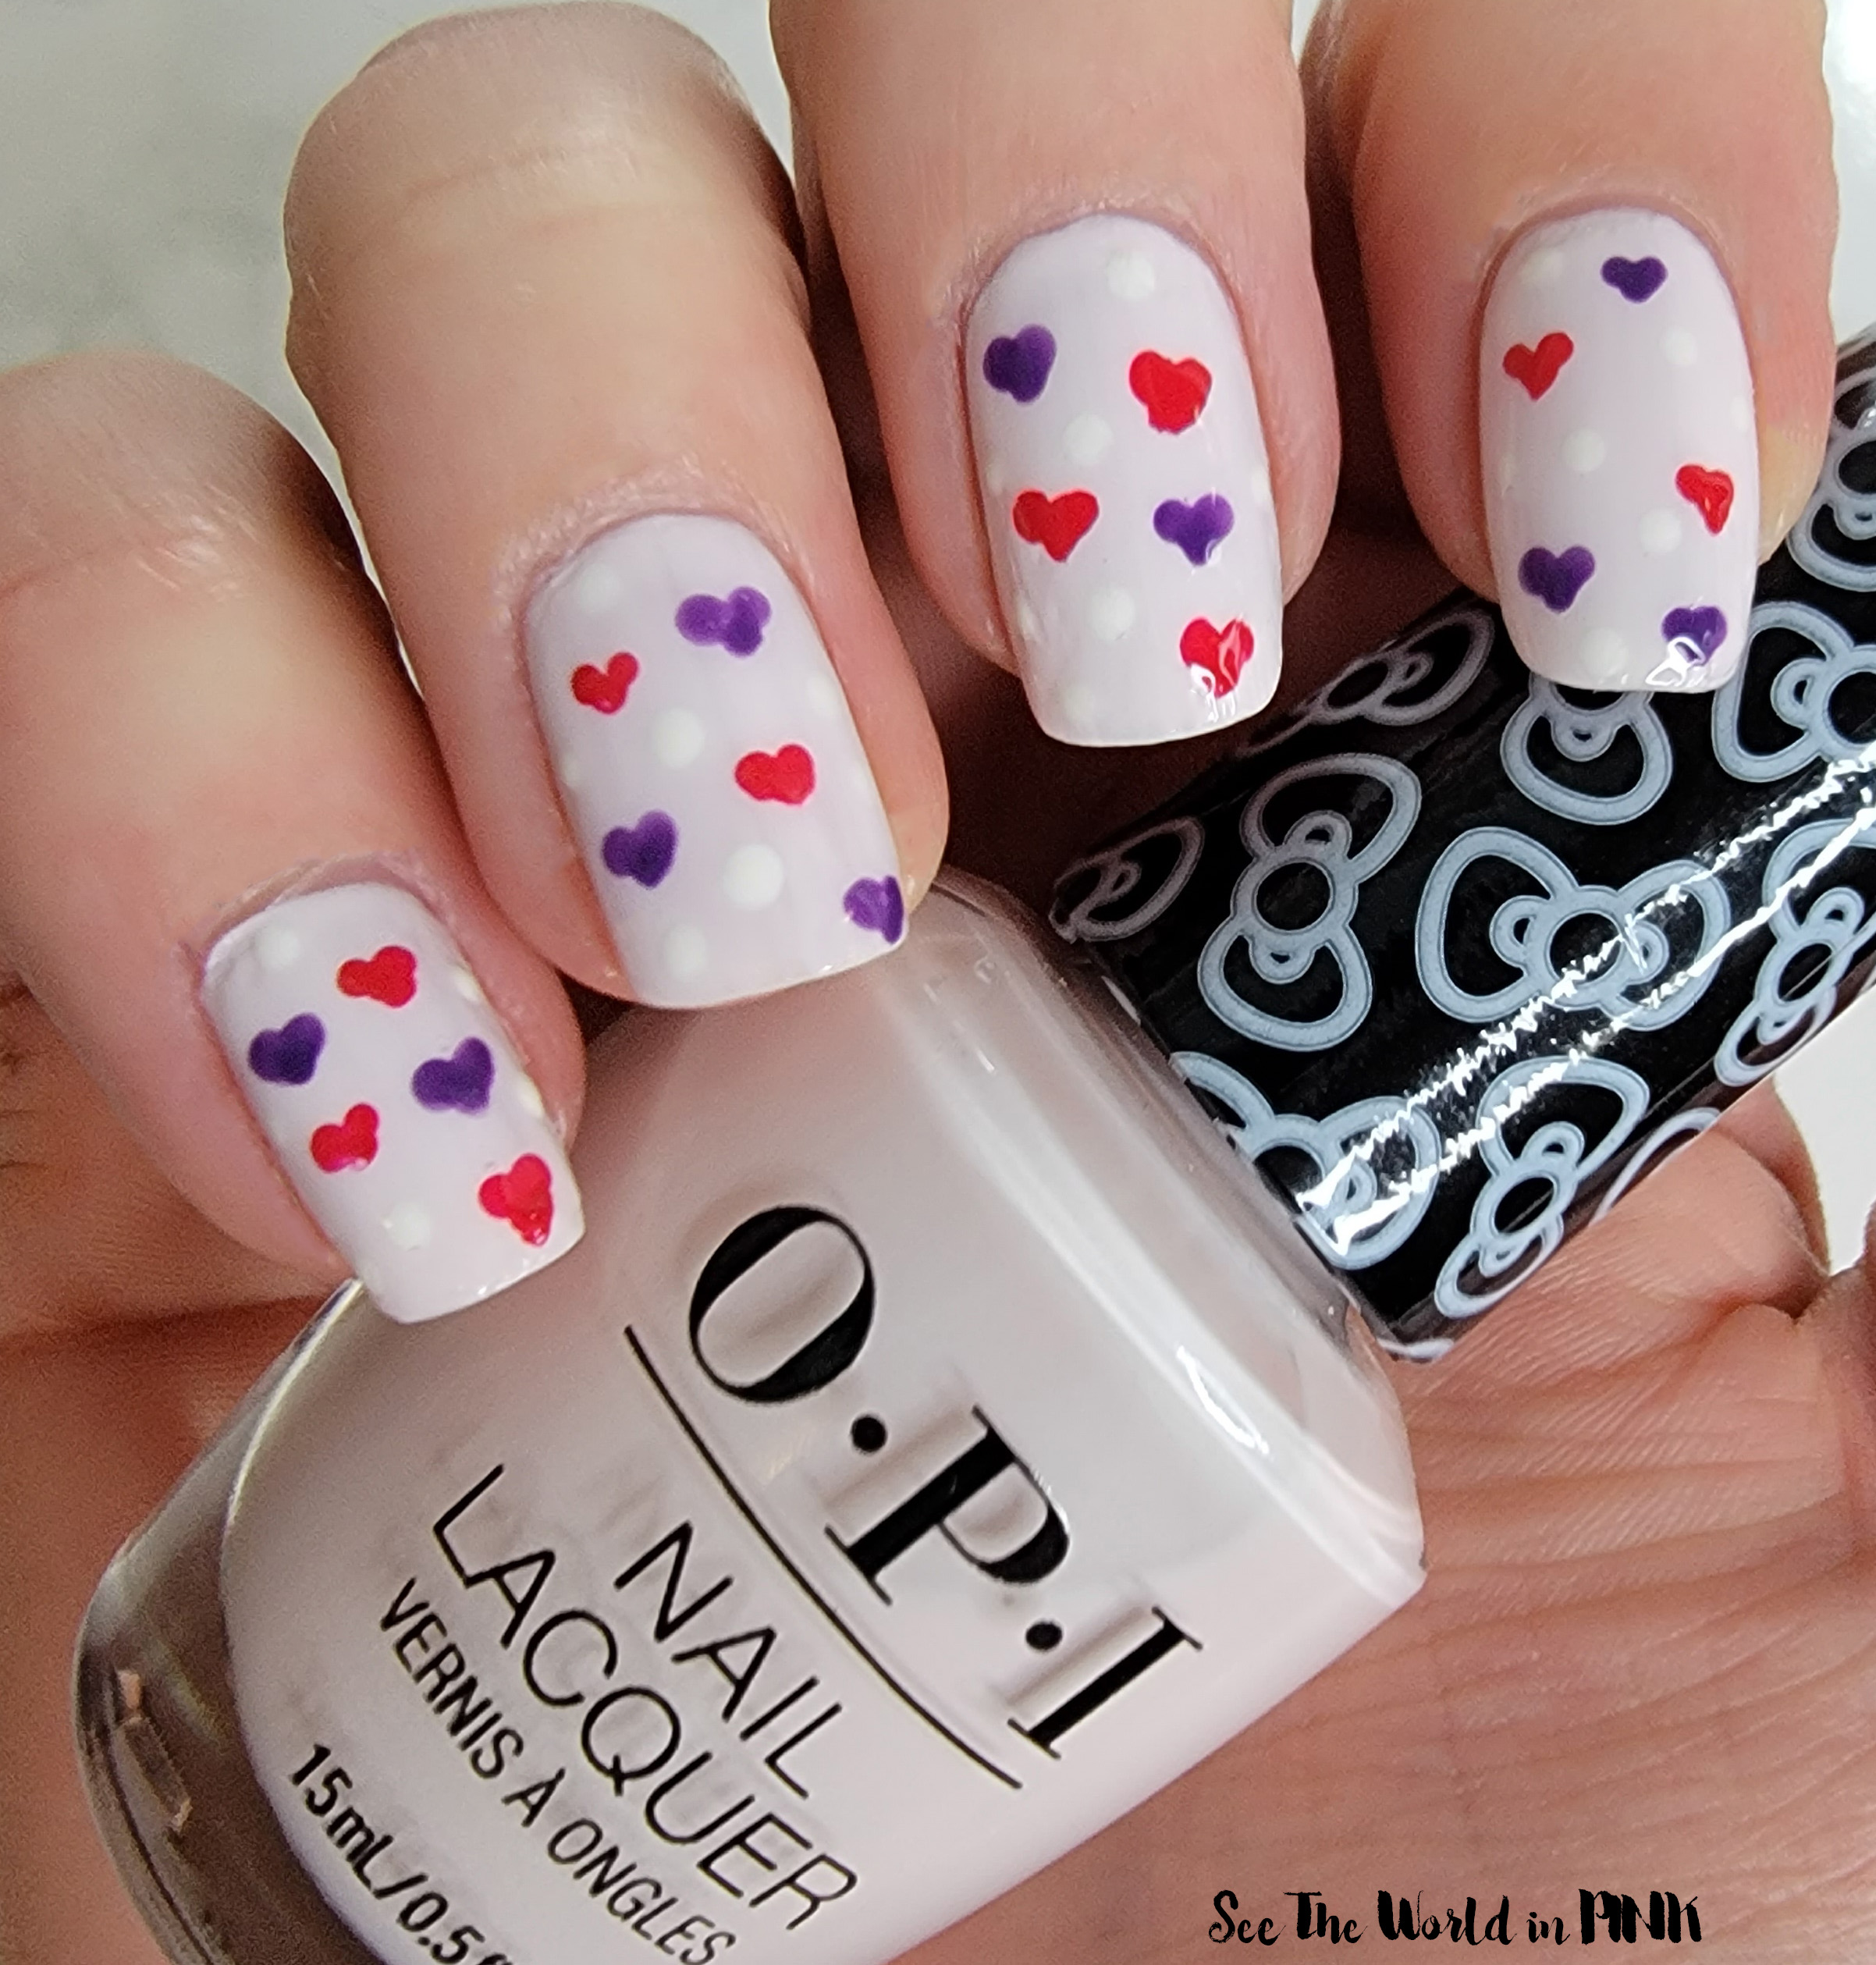 Manicure Monday - Valentine's Day Hearts and Dots Nails